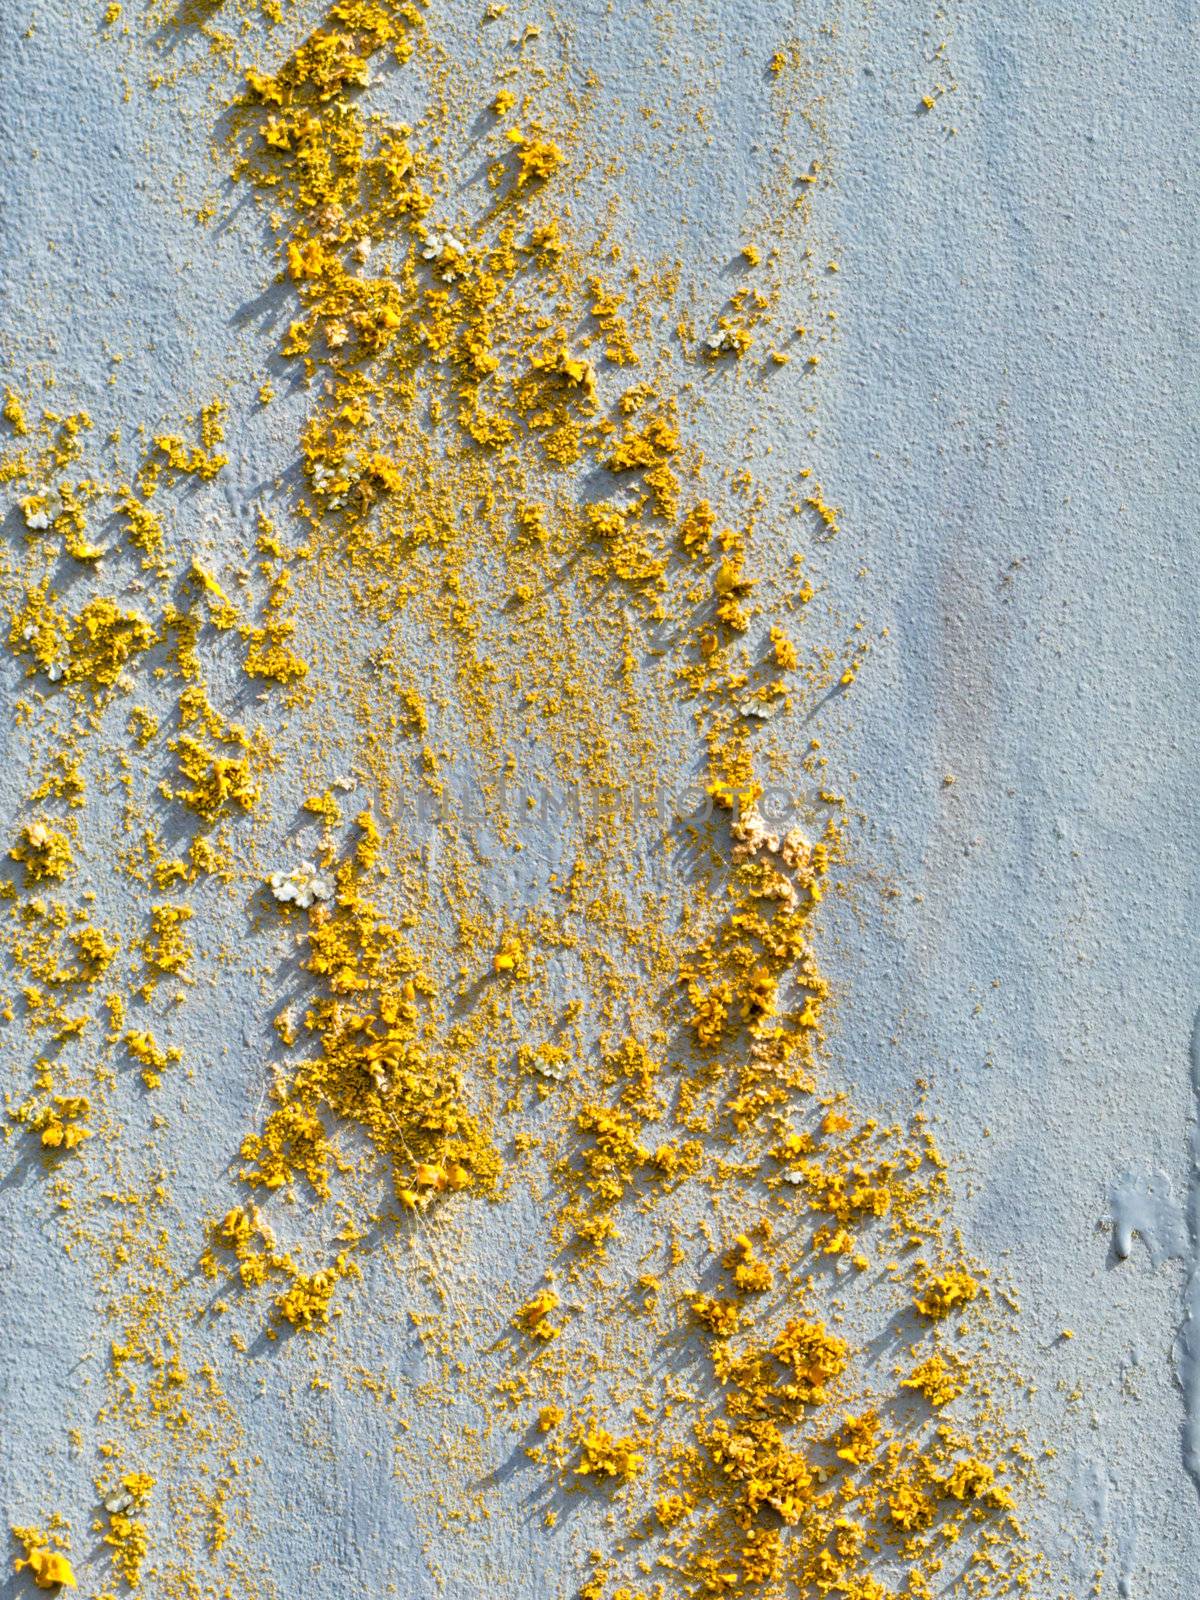 Background texture pattern of loose rust on rough iron metal surface of an painted grey exterior wall in sunshine